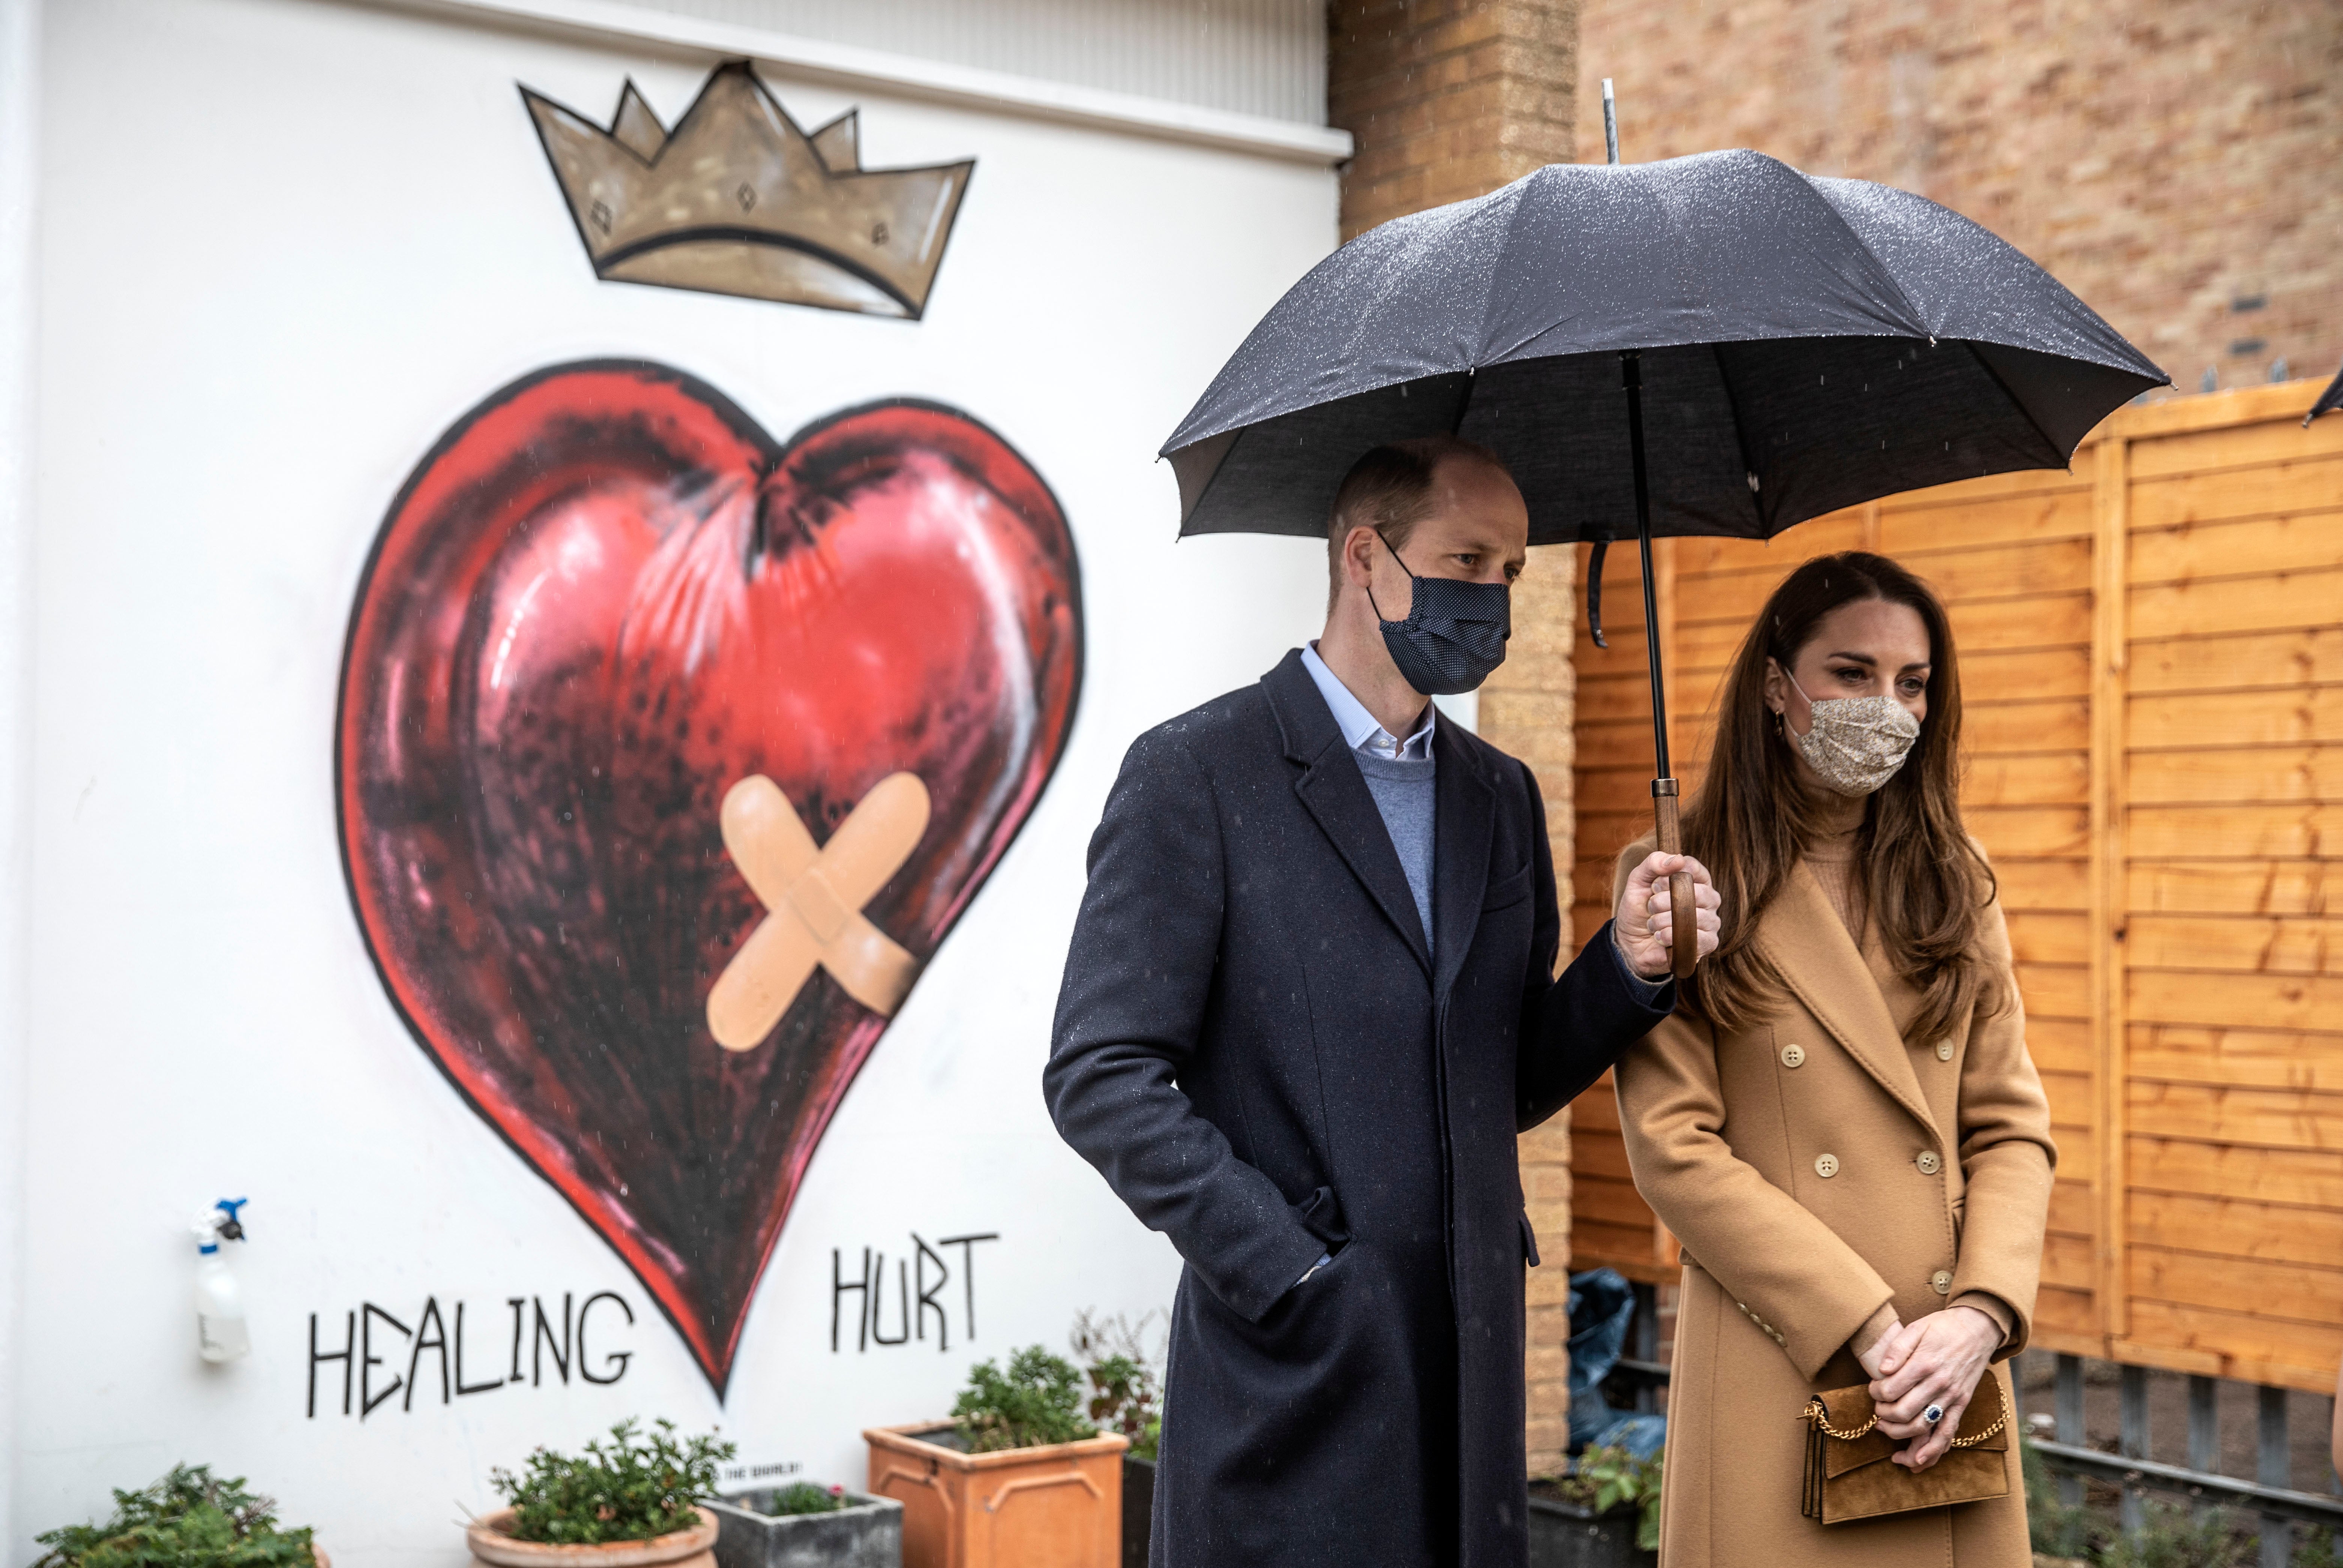 William Kate photographed in front hurt' mural | The Independent